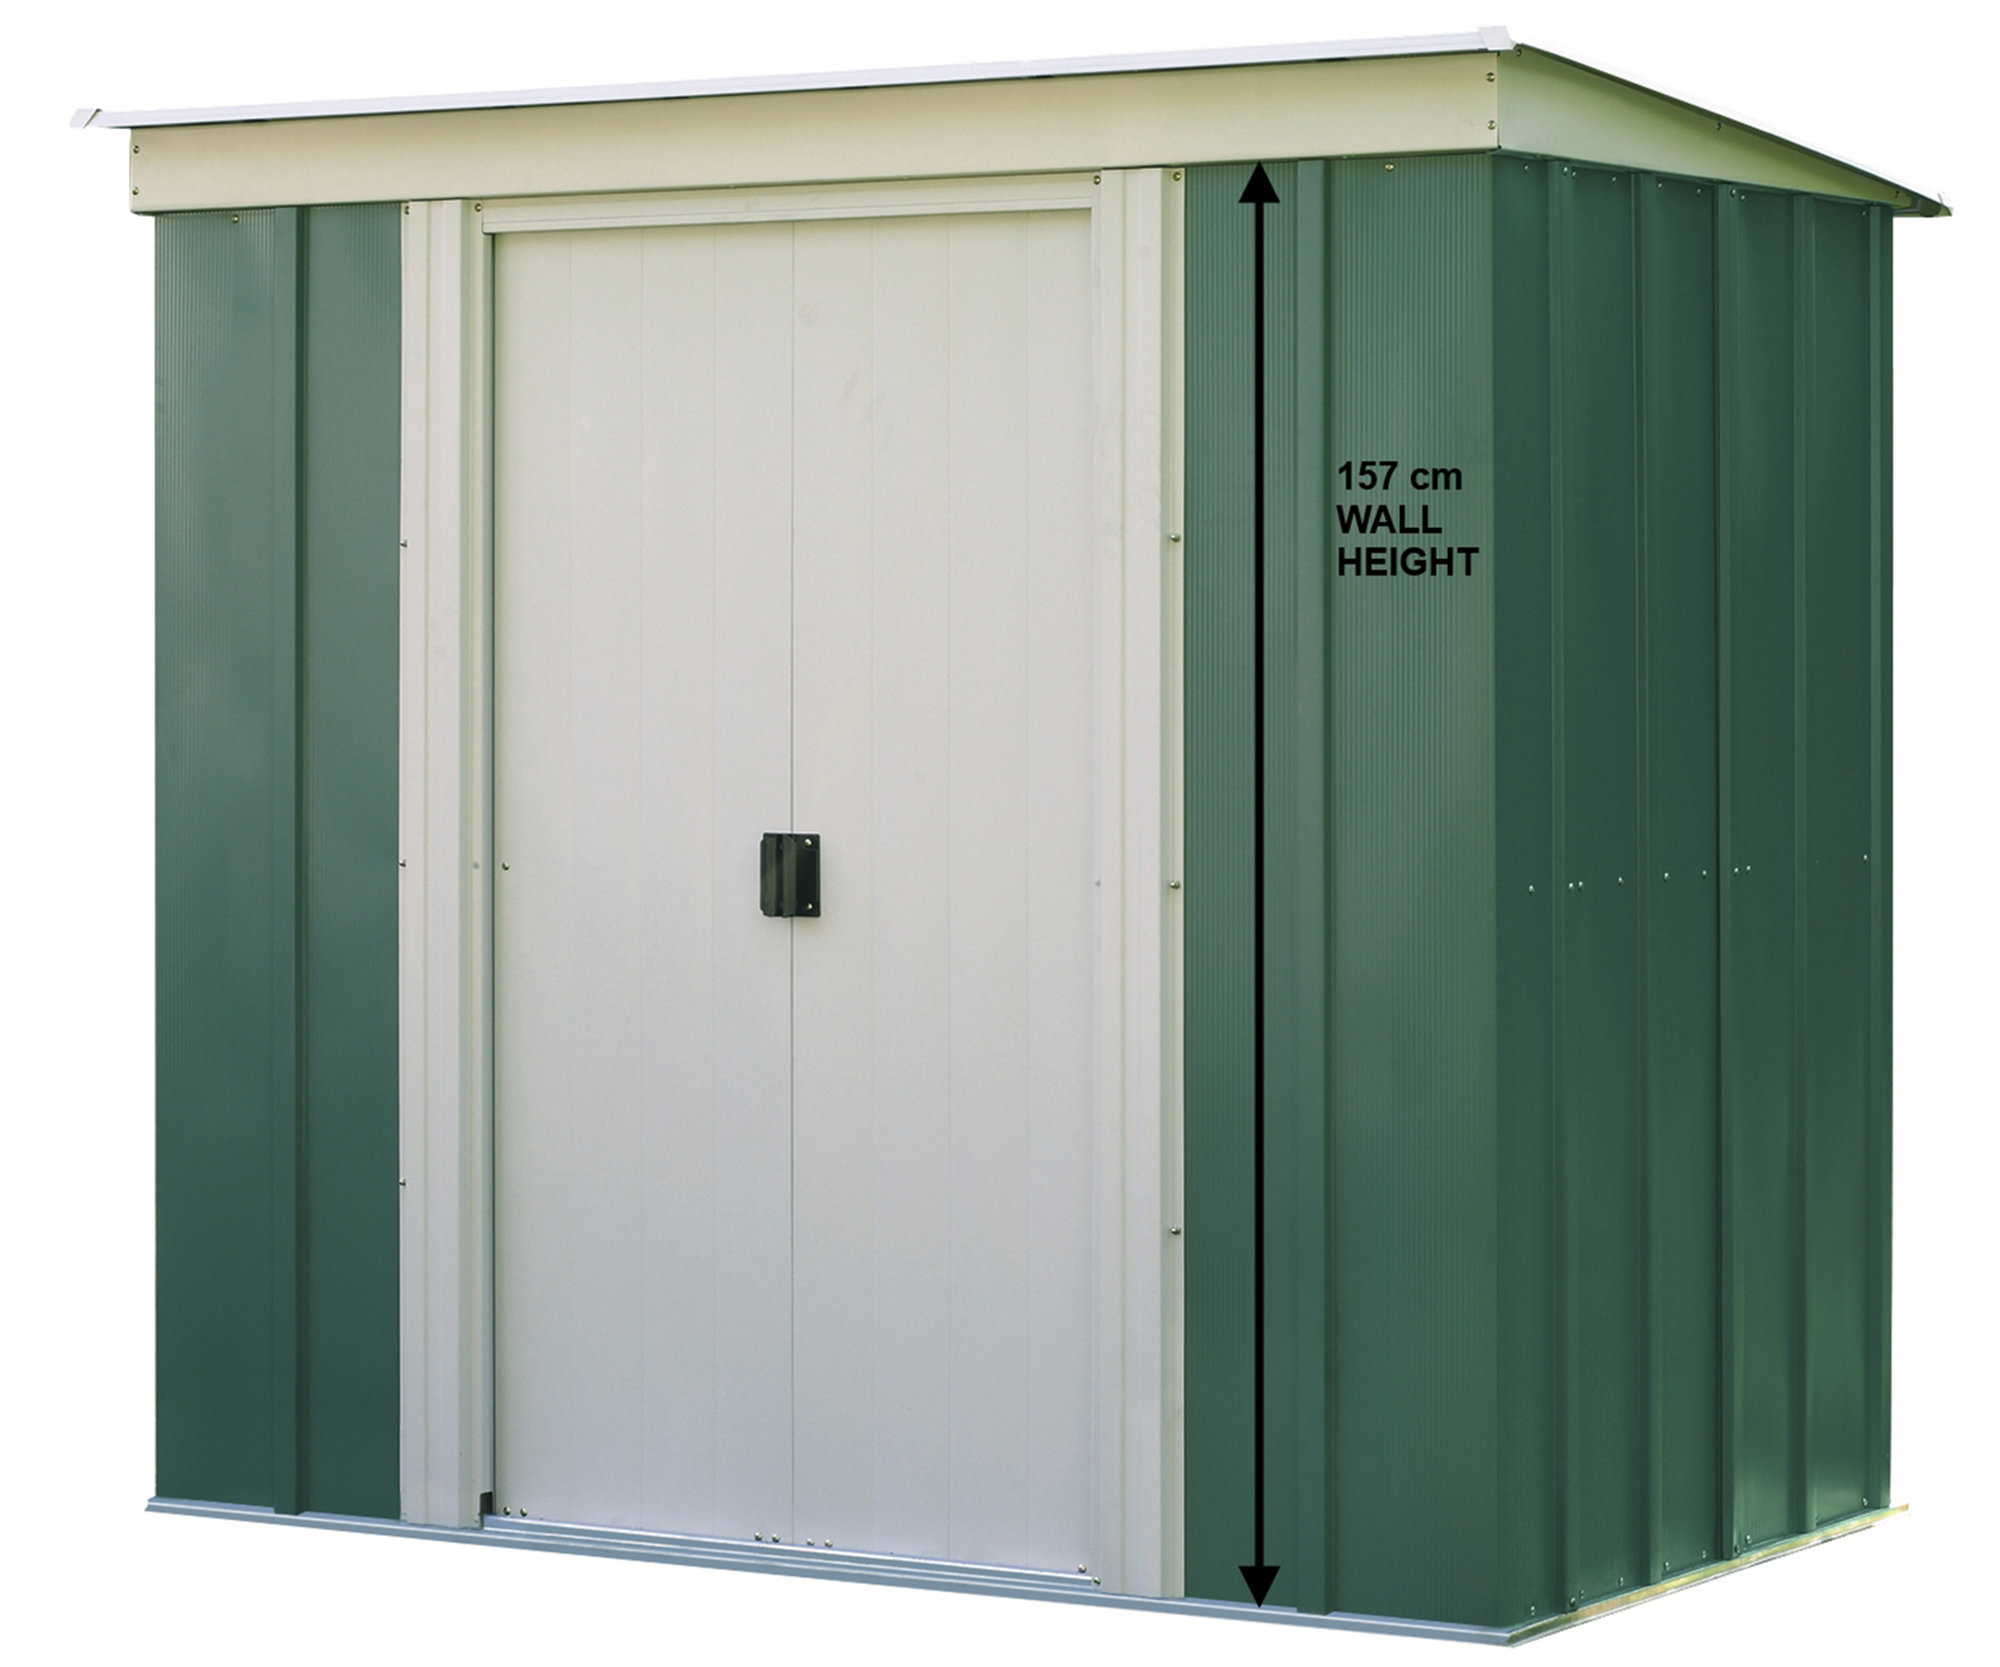 Jaxpety 7-ft x 4-ft Galvanized Steel Storage Shed in Green | HG61S0647